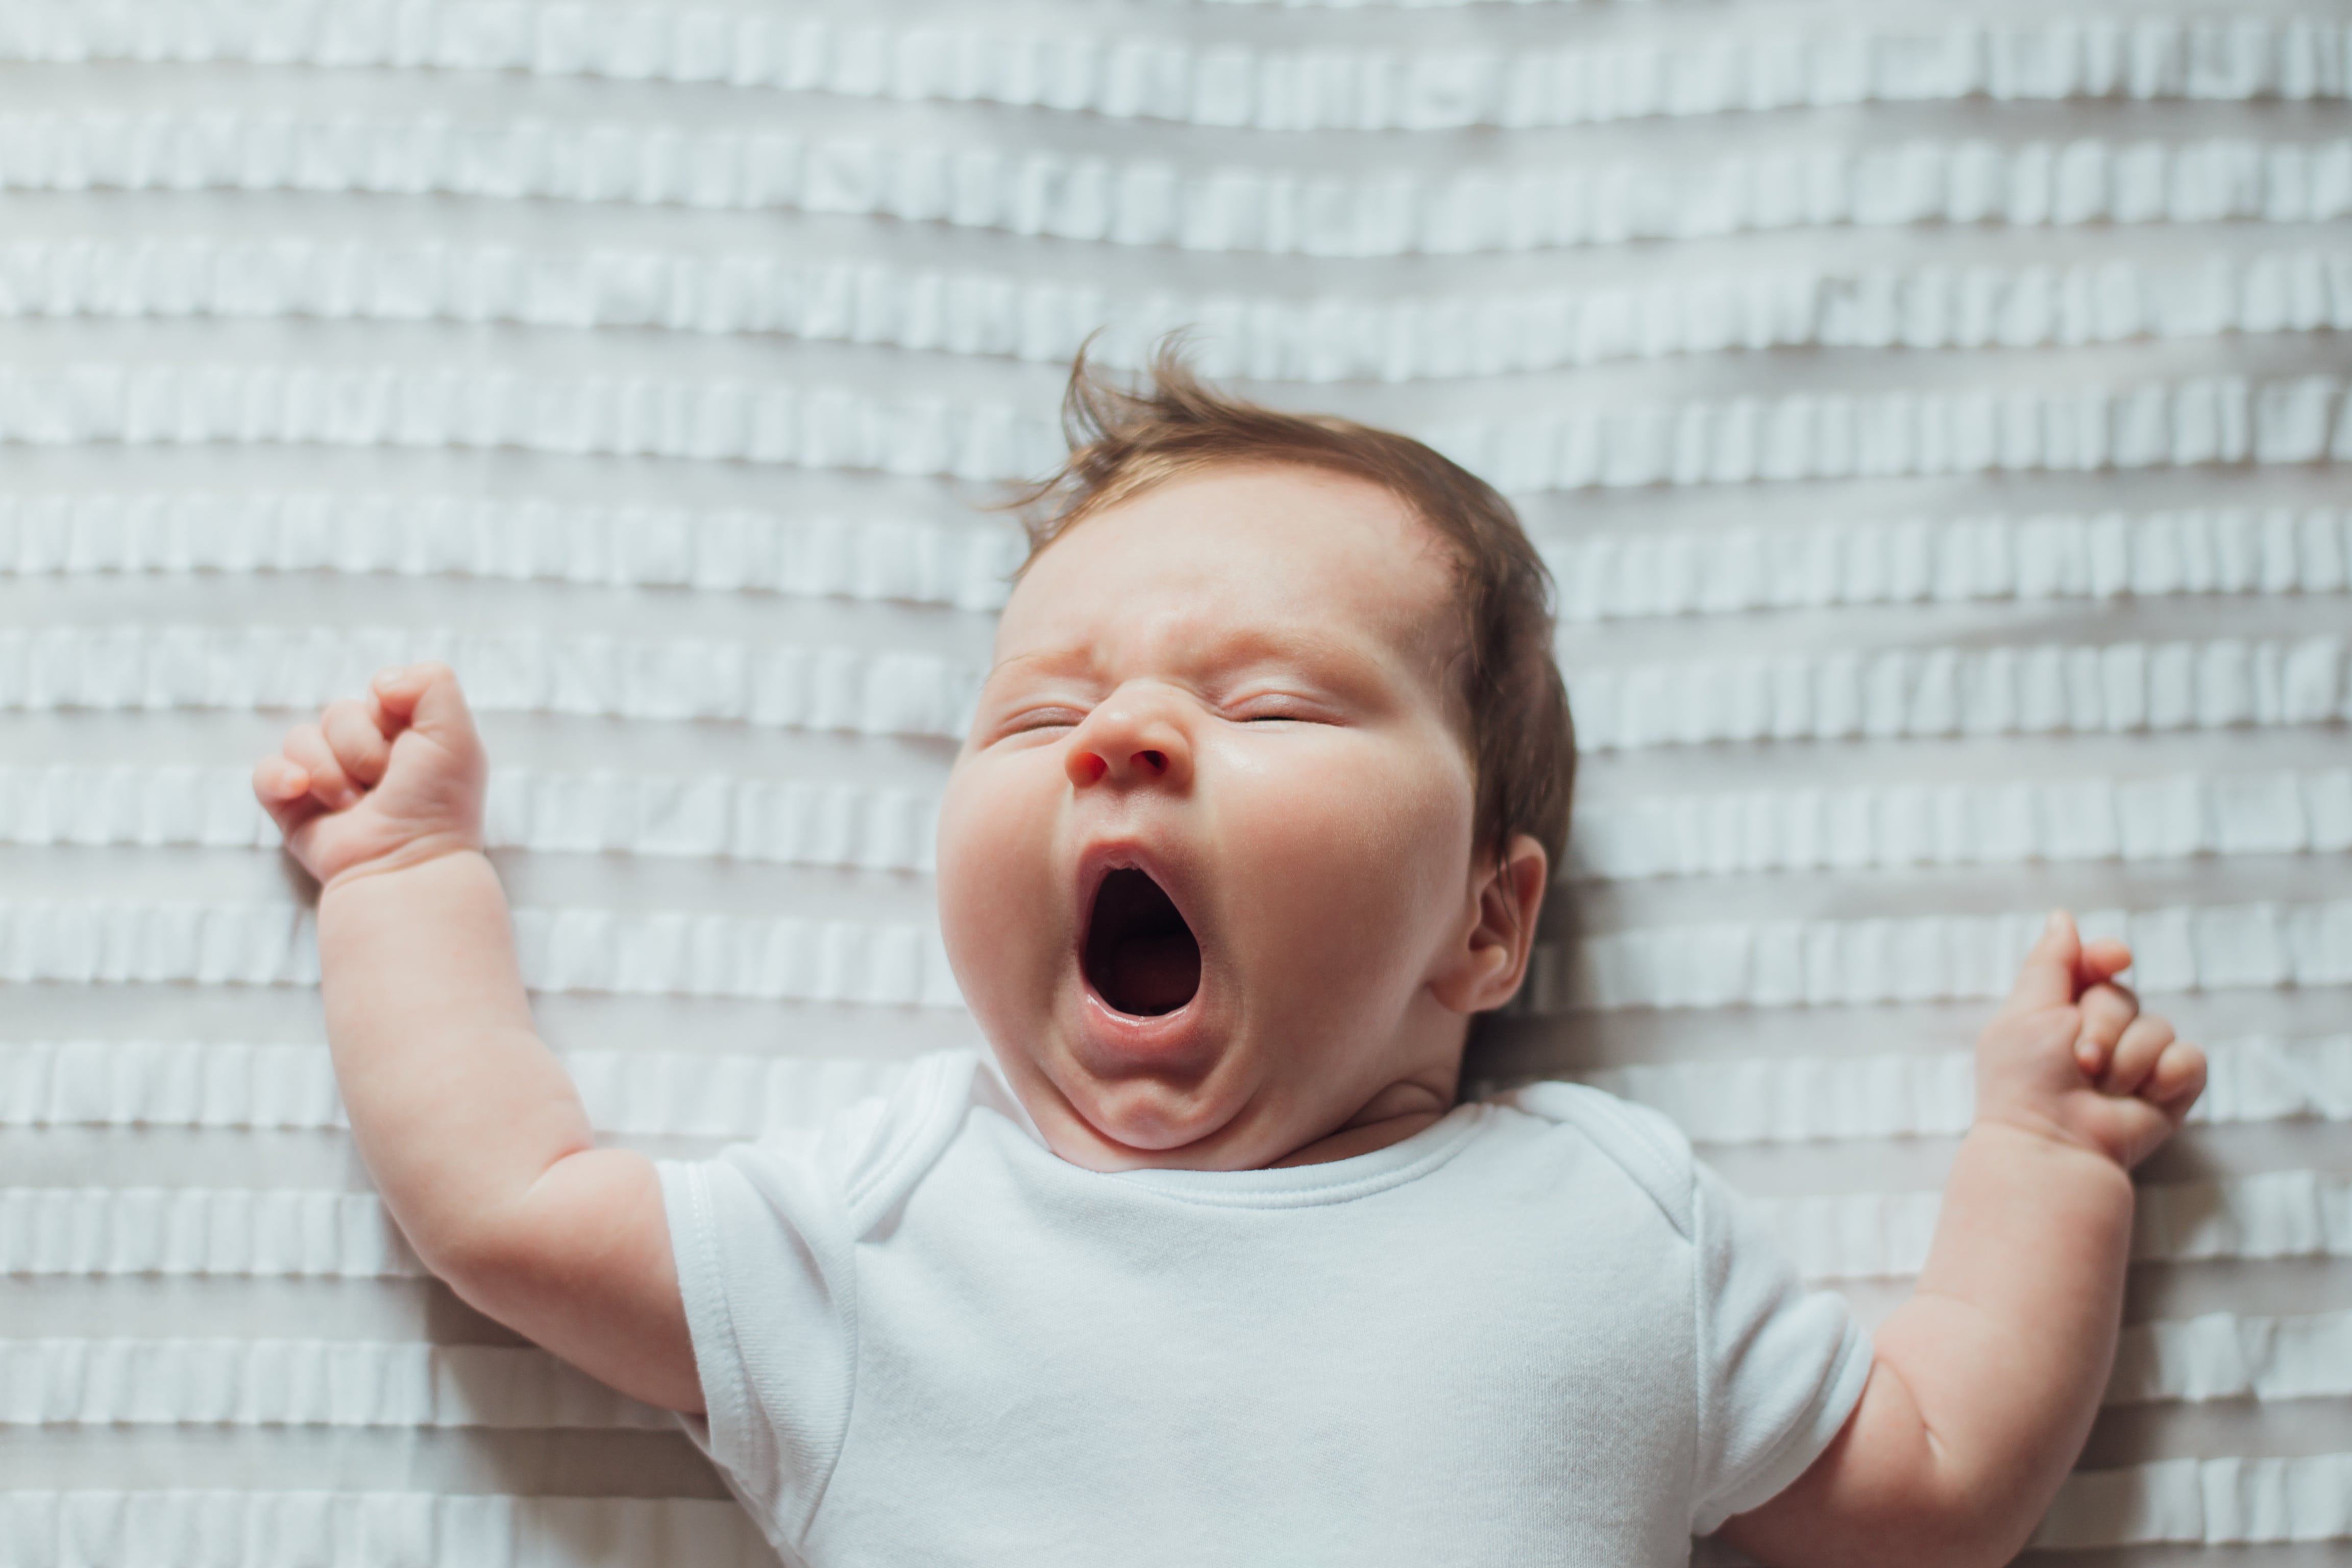 A baby on it's back, yawning with both arms stretched upwards by it's sides